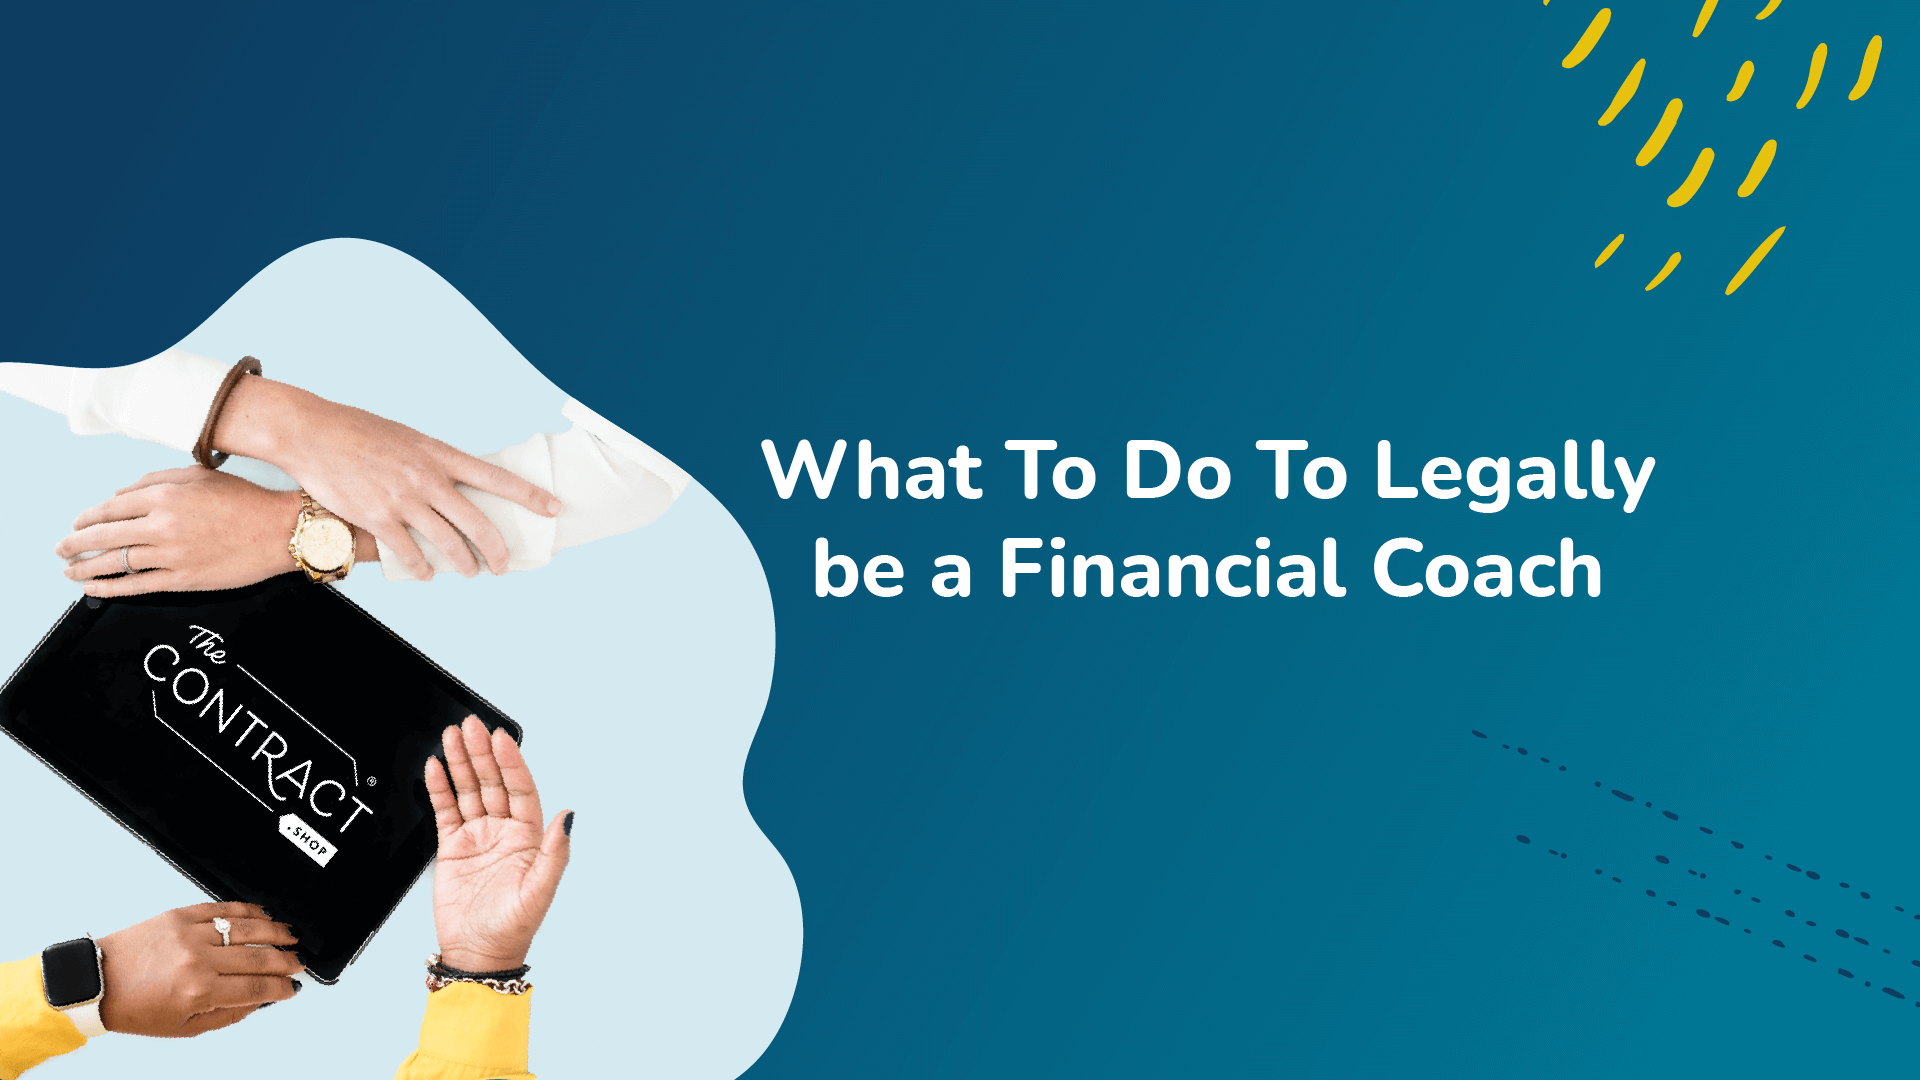 What To Do to Legally be a Financial Coach